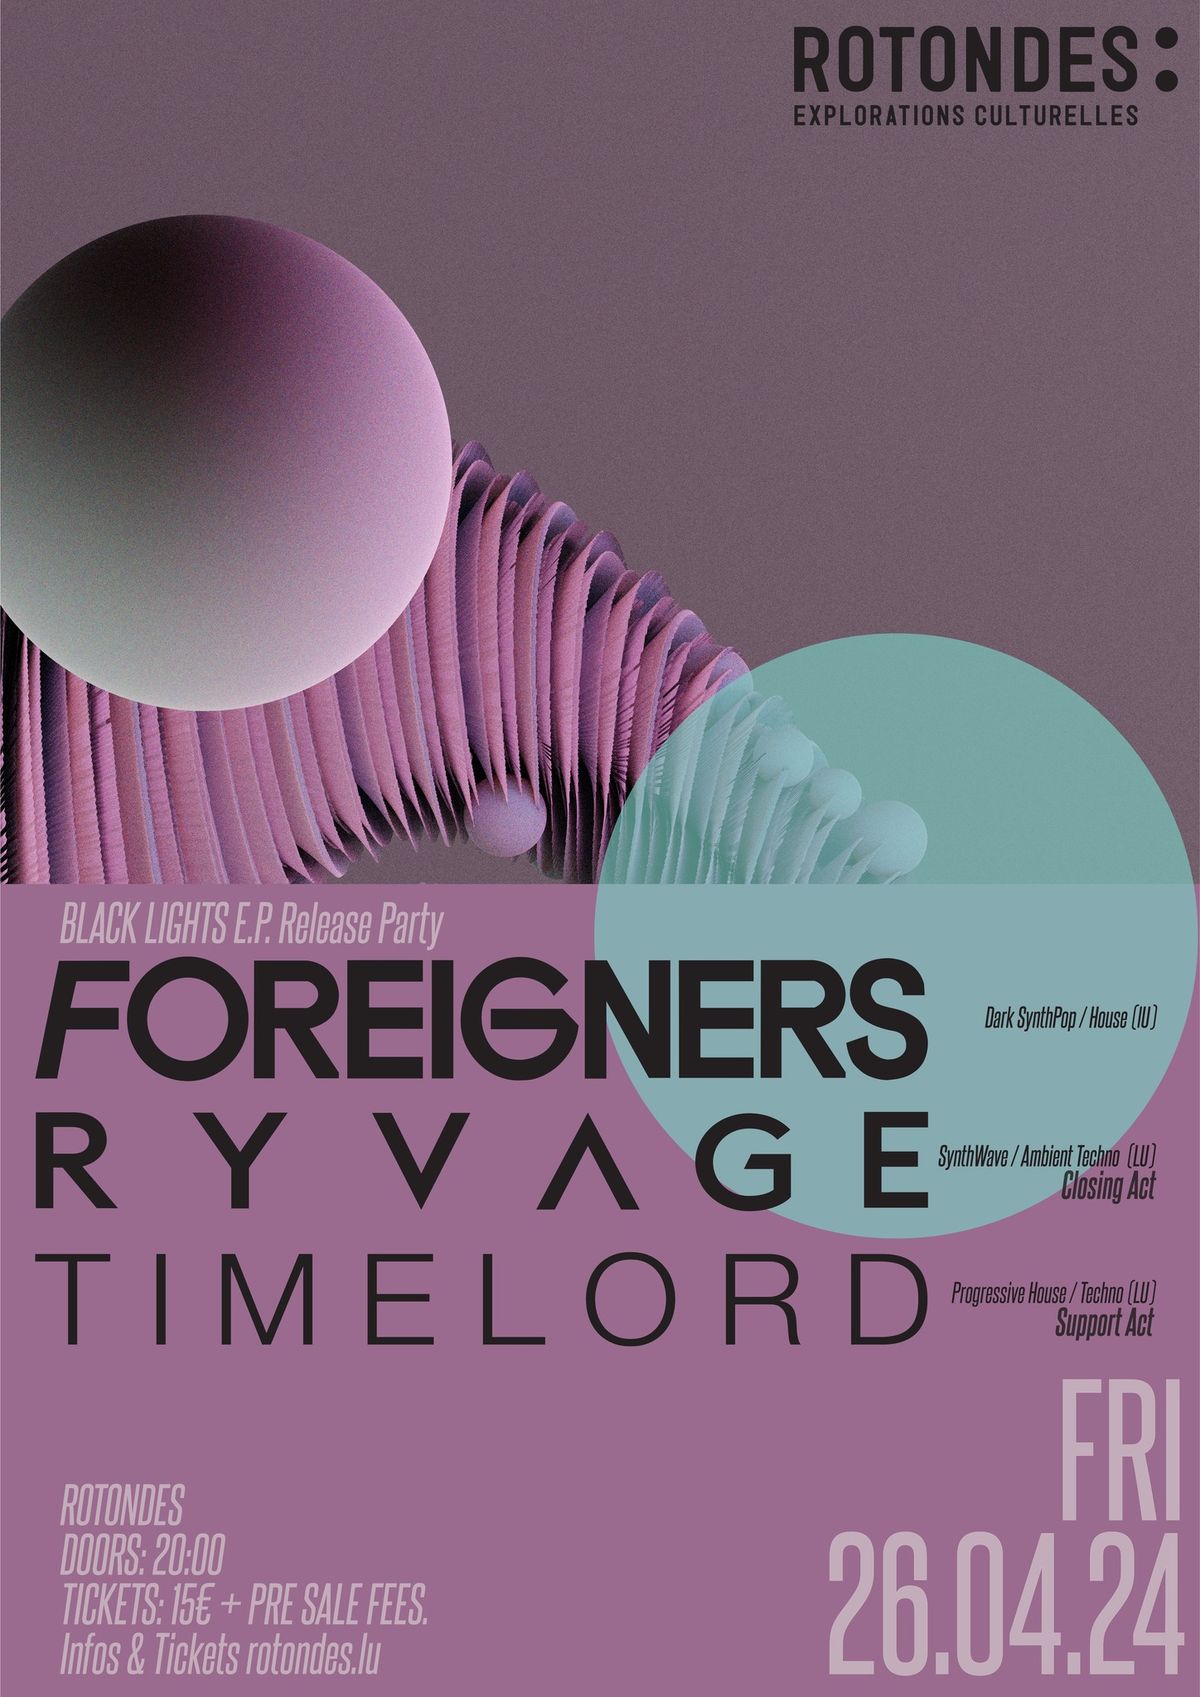 FOREIGNERS BLACK LIGHTS E.P Release Party \/\/ RYVAGE \/\/ TIMELORD